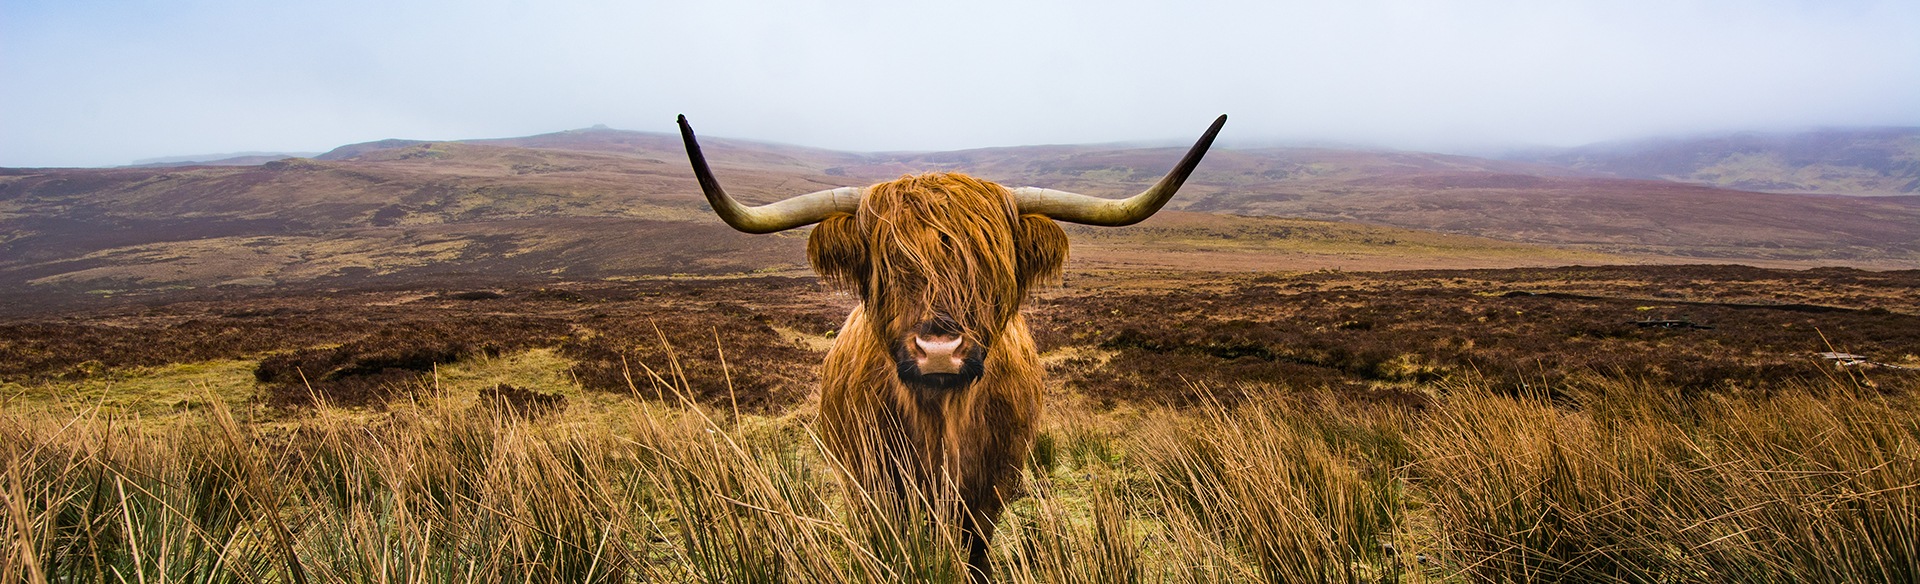 What is so special about HIghland cows?